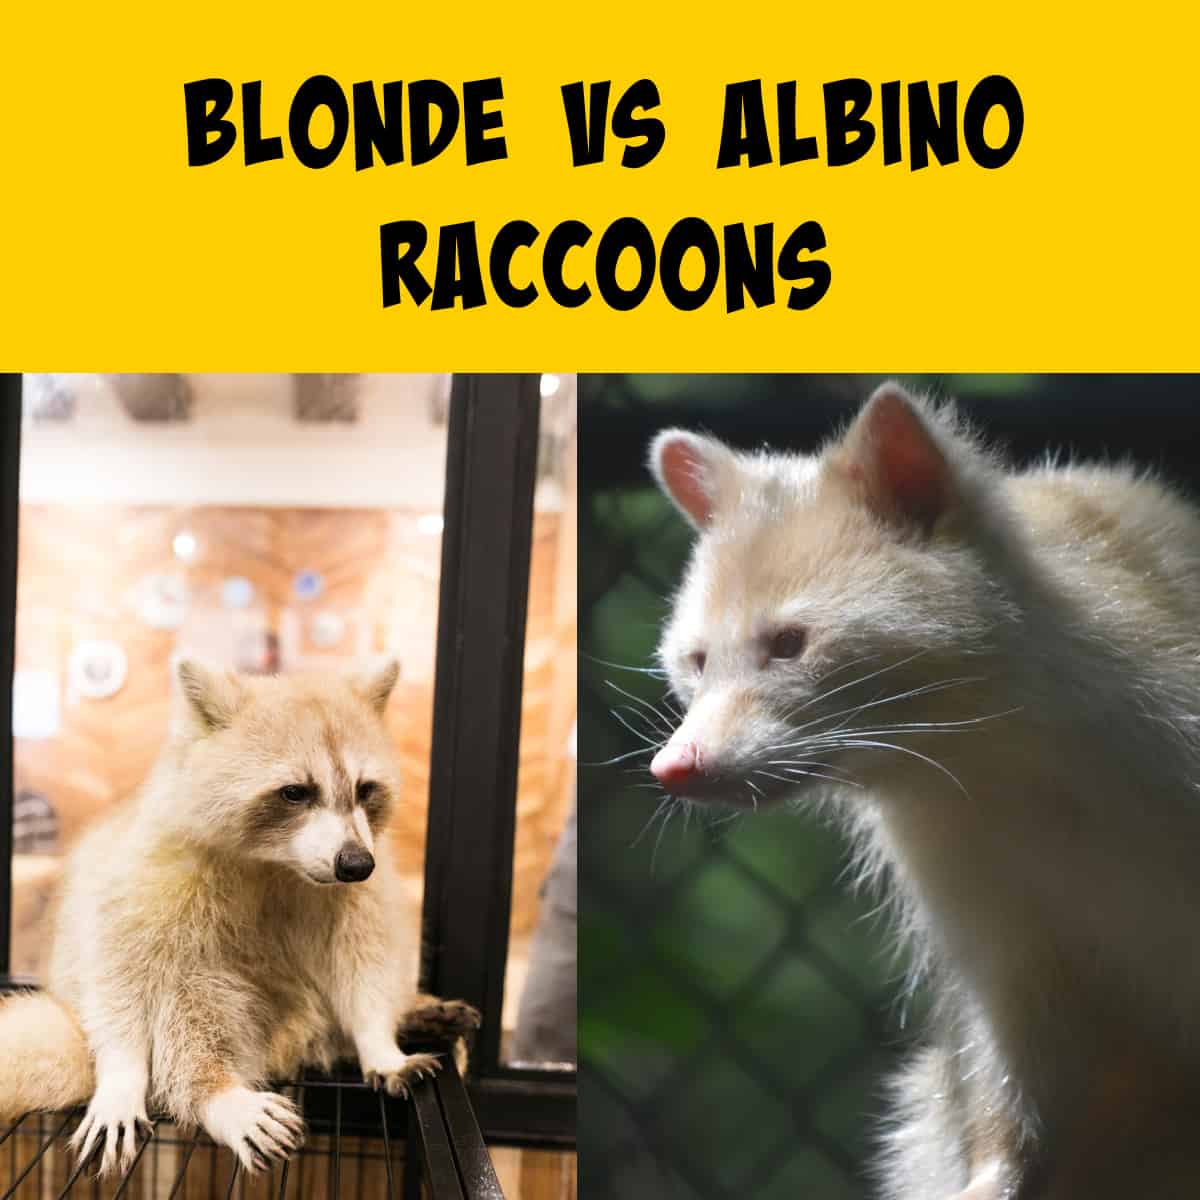 Side by side view of a blonde raccoon with an albino raccoon